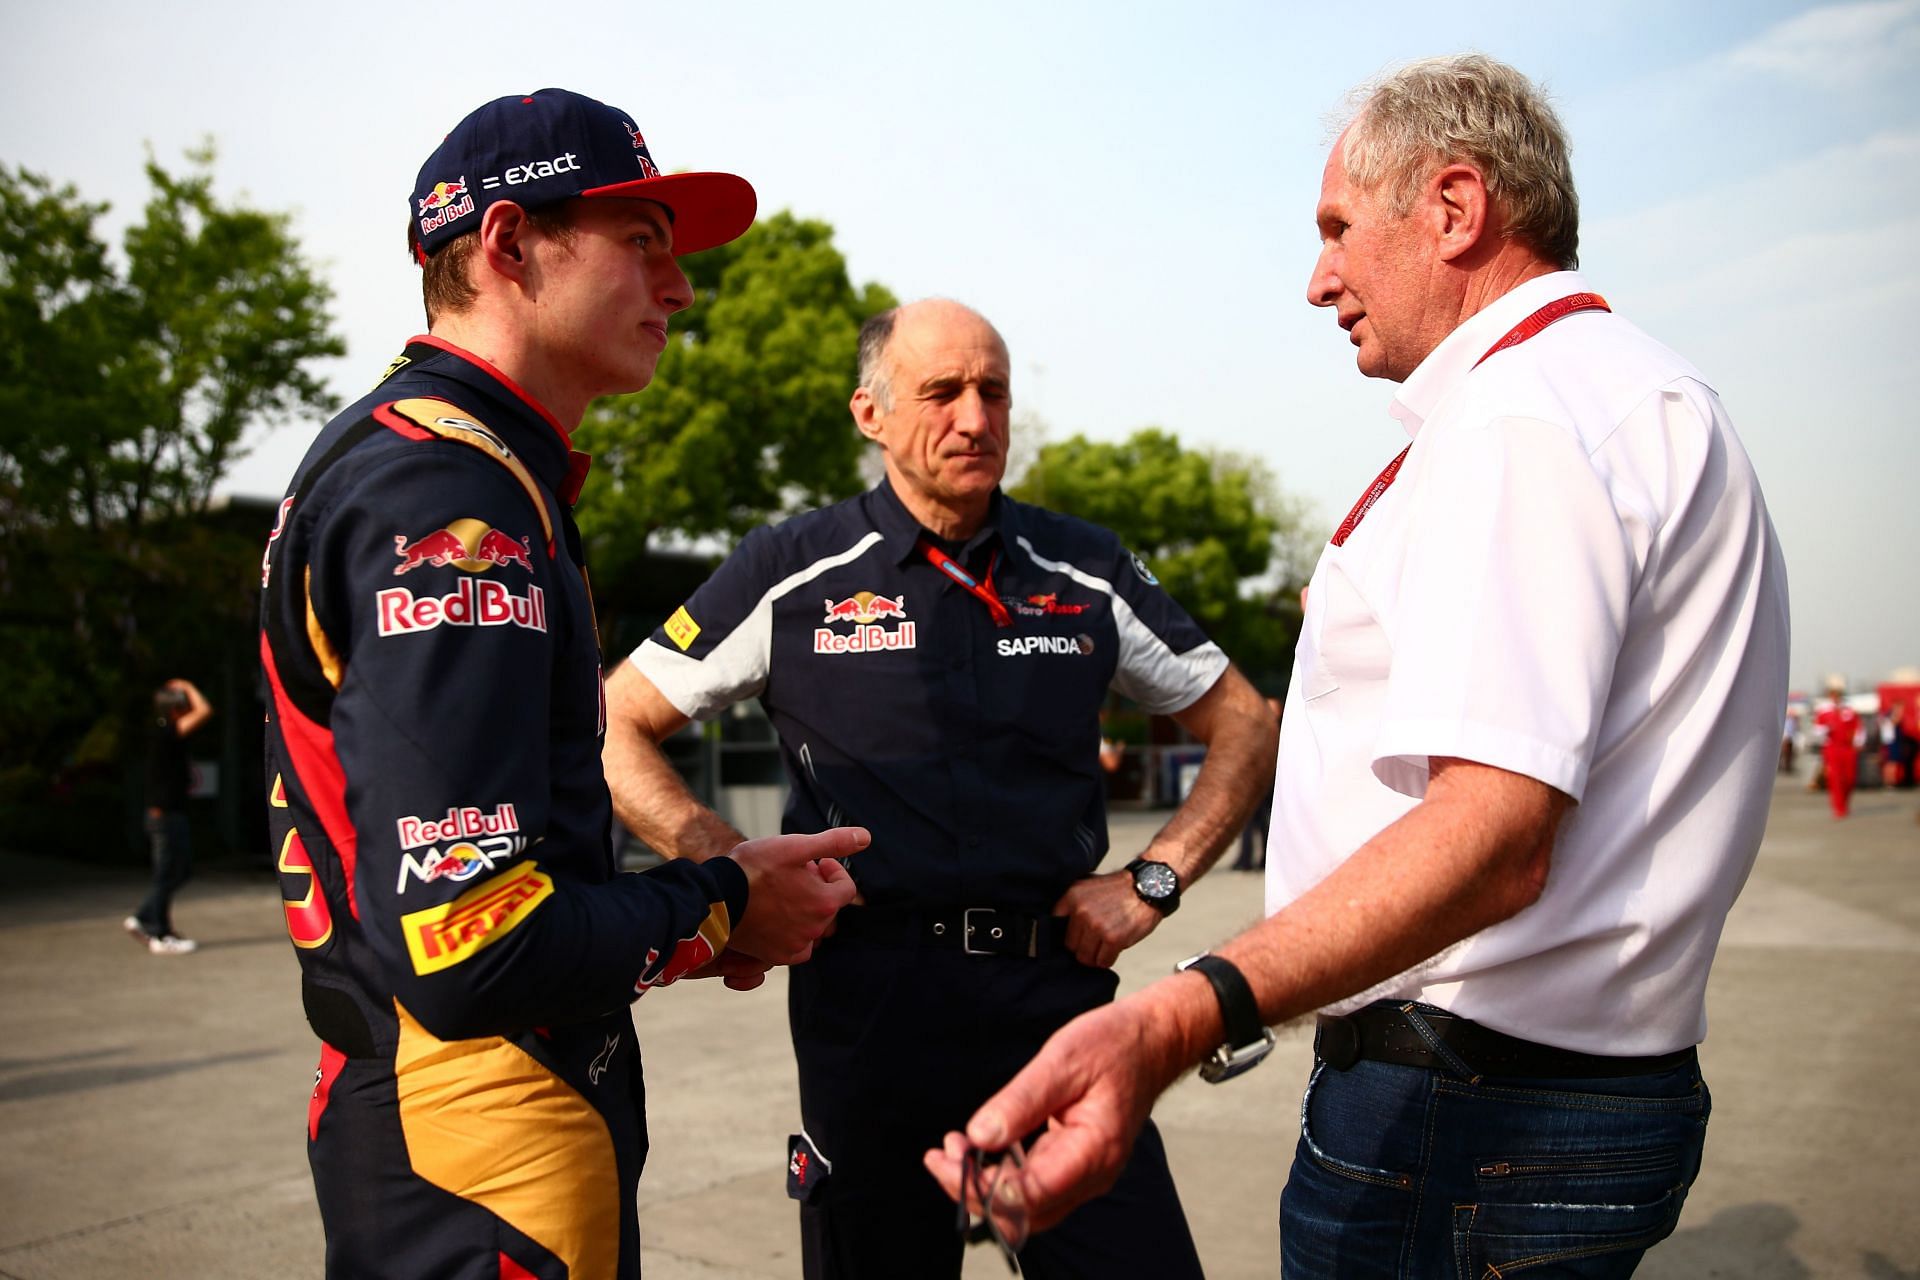 Max Verstappen with Helmut Marko, and Scuderia Toro Rosso Team Principal Franz Tost in the Paddock during his debut season in F1. (Photo by Dan Istitene/Getty Images)